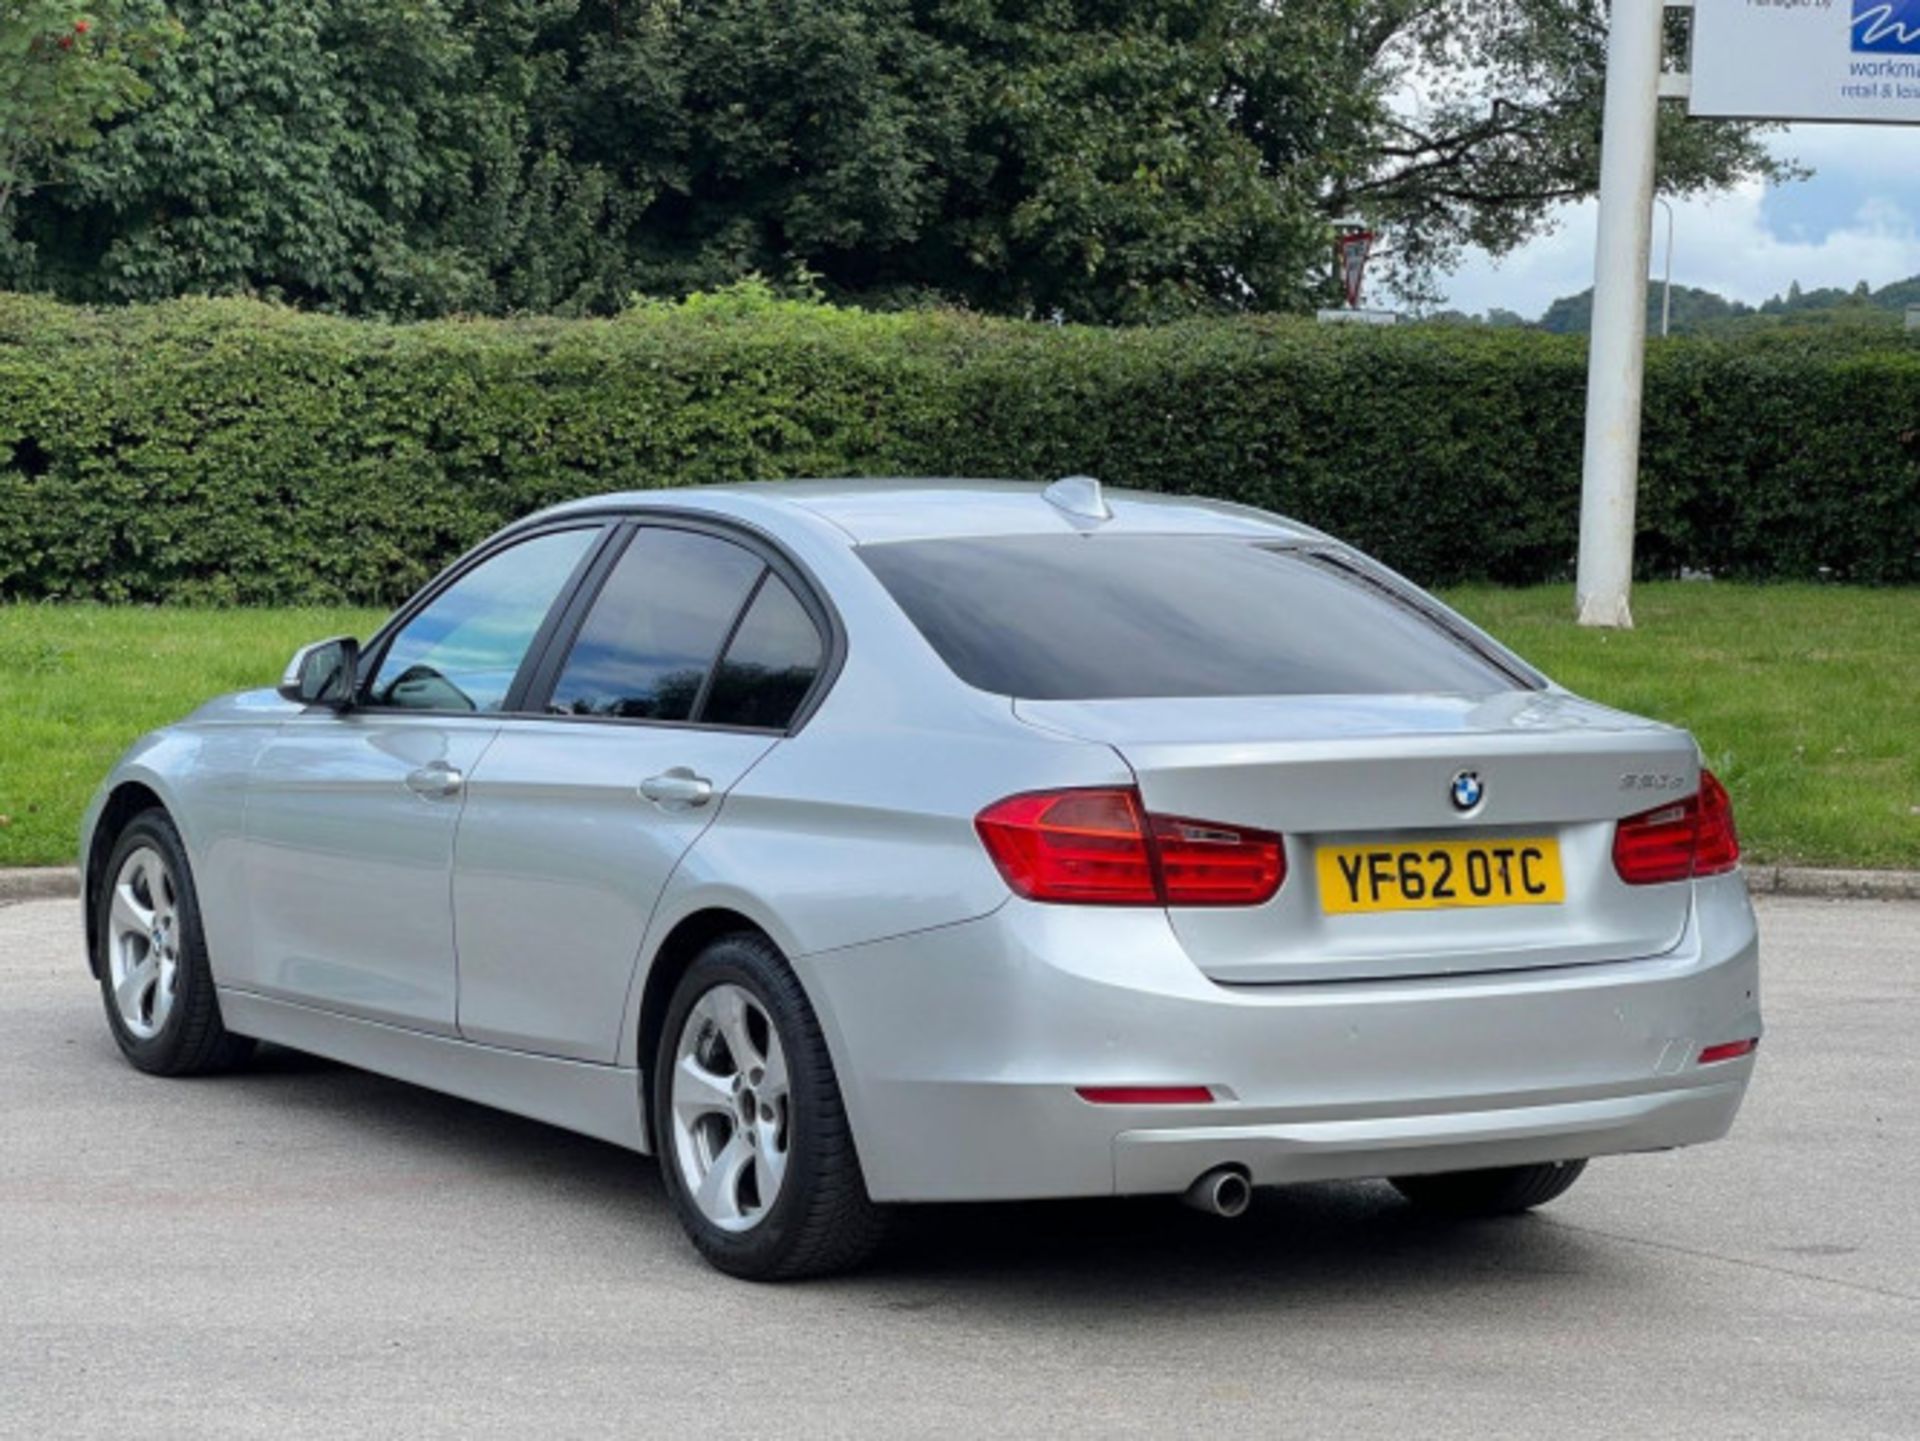 BMW 3 SERIES 2.0 DIESEL ED START STOP - A WELL-MAINTAINED GEM >>--NO VAT ON HAMMER--<< - Image 3 of 229